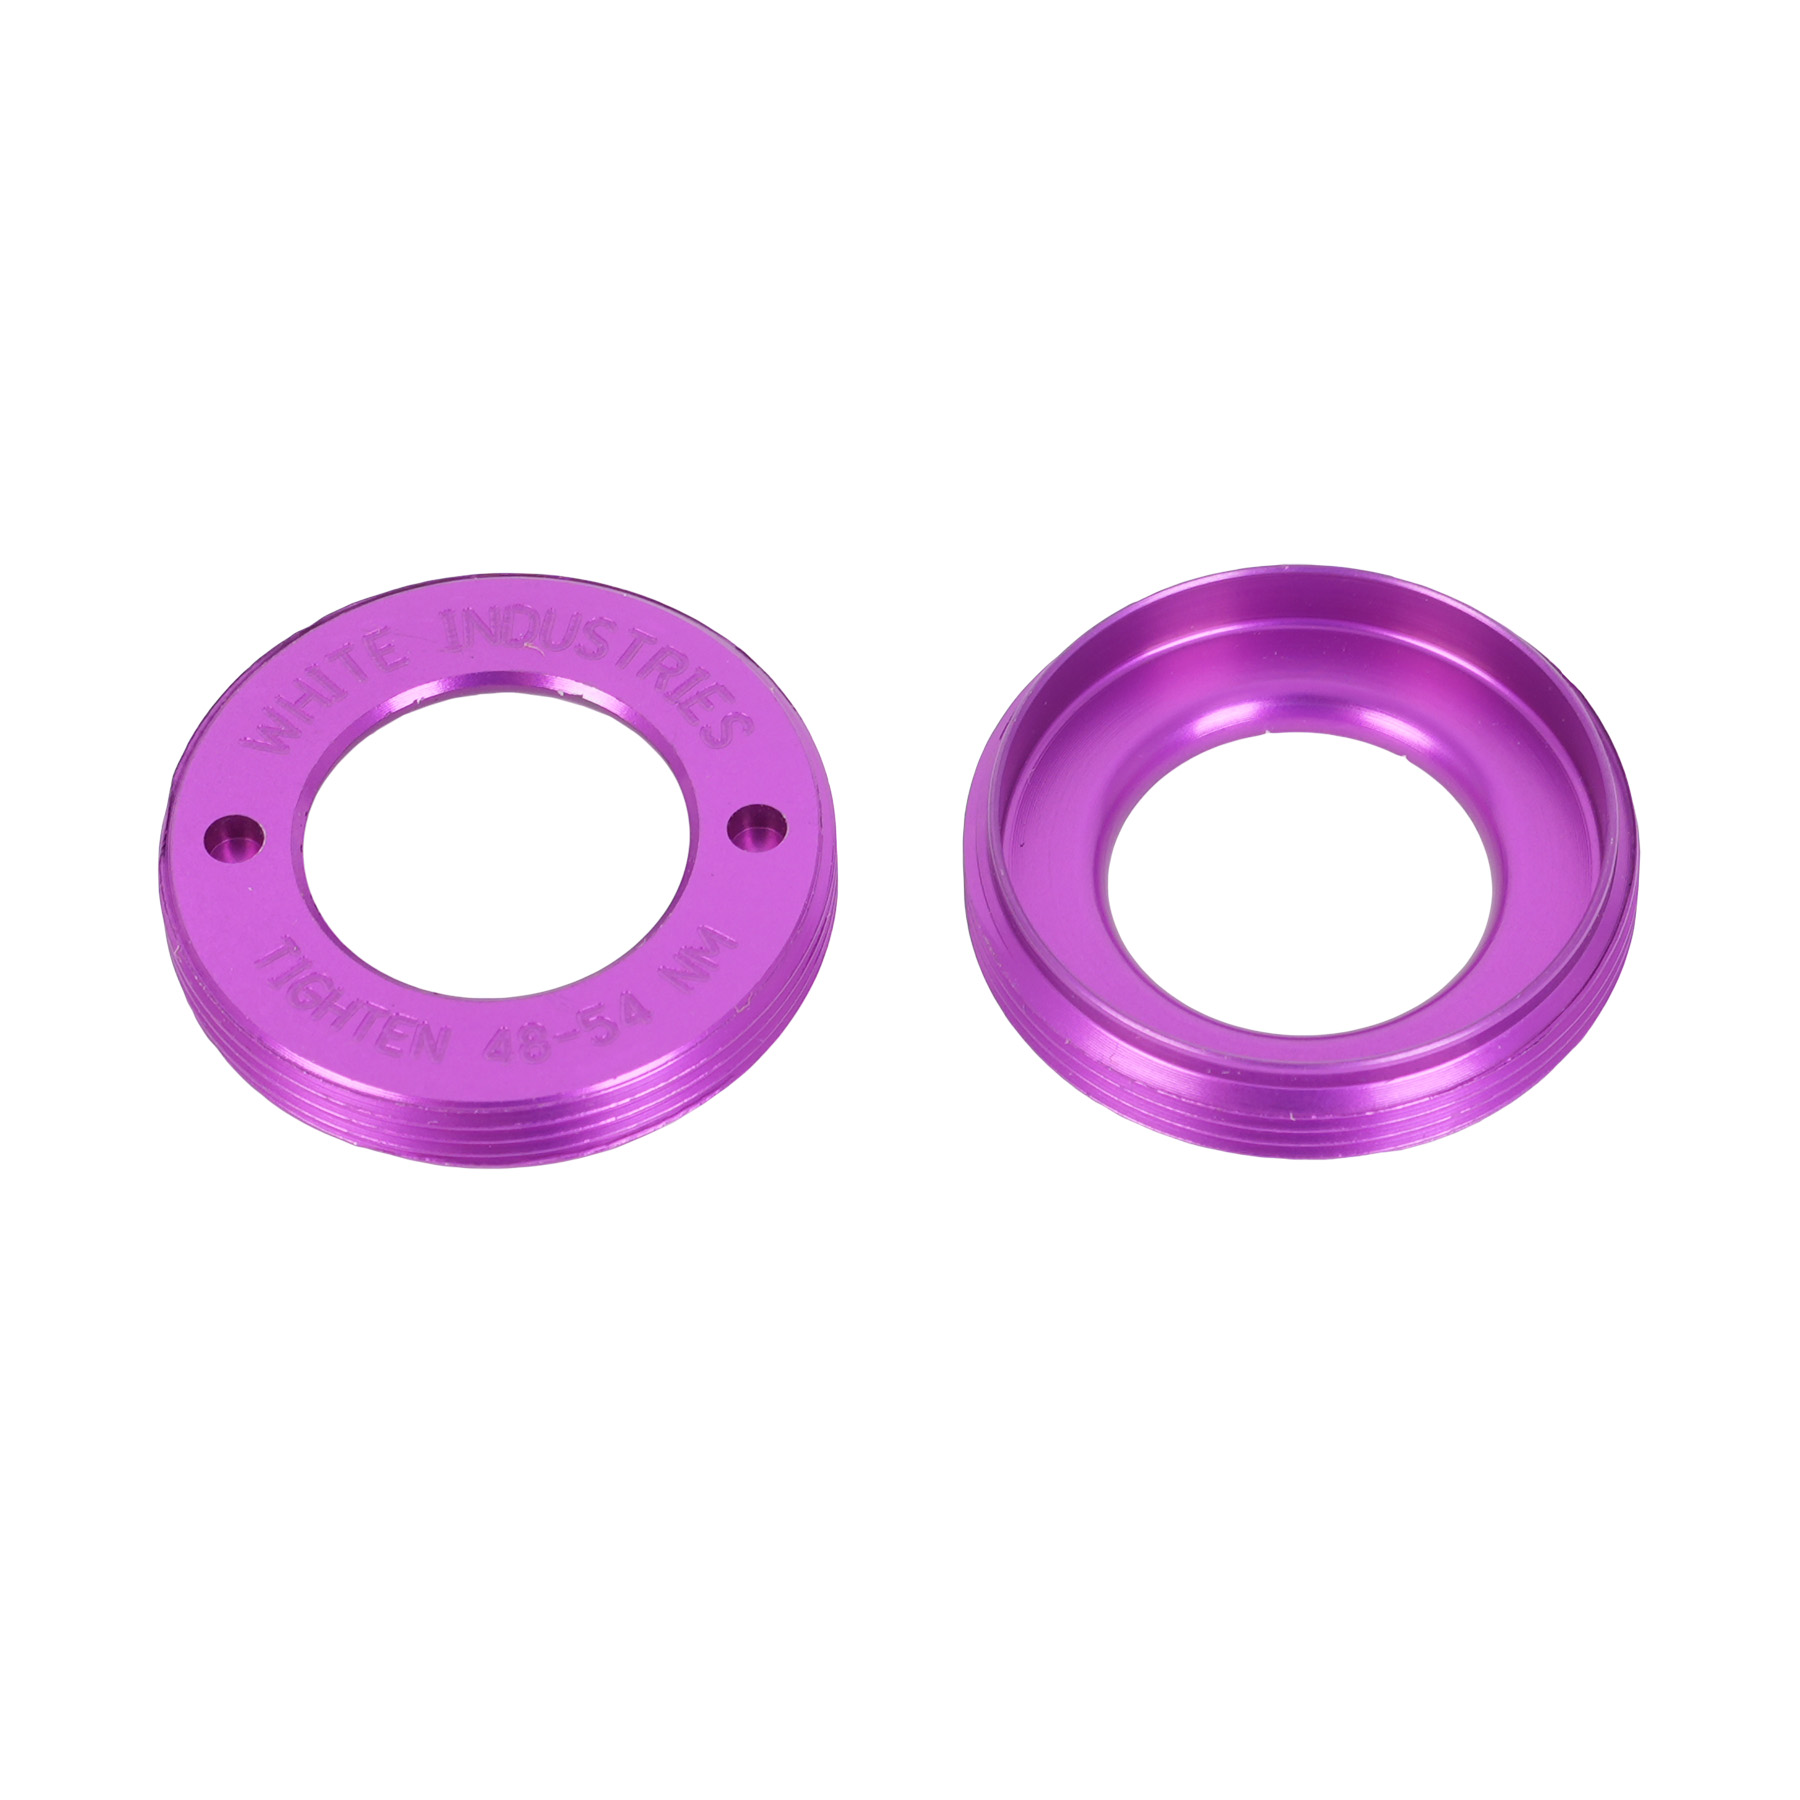 Picture of White Industries Extractor Caps for M30, G30, R30 Cranks - purple